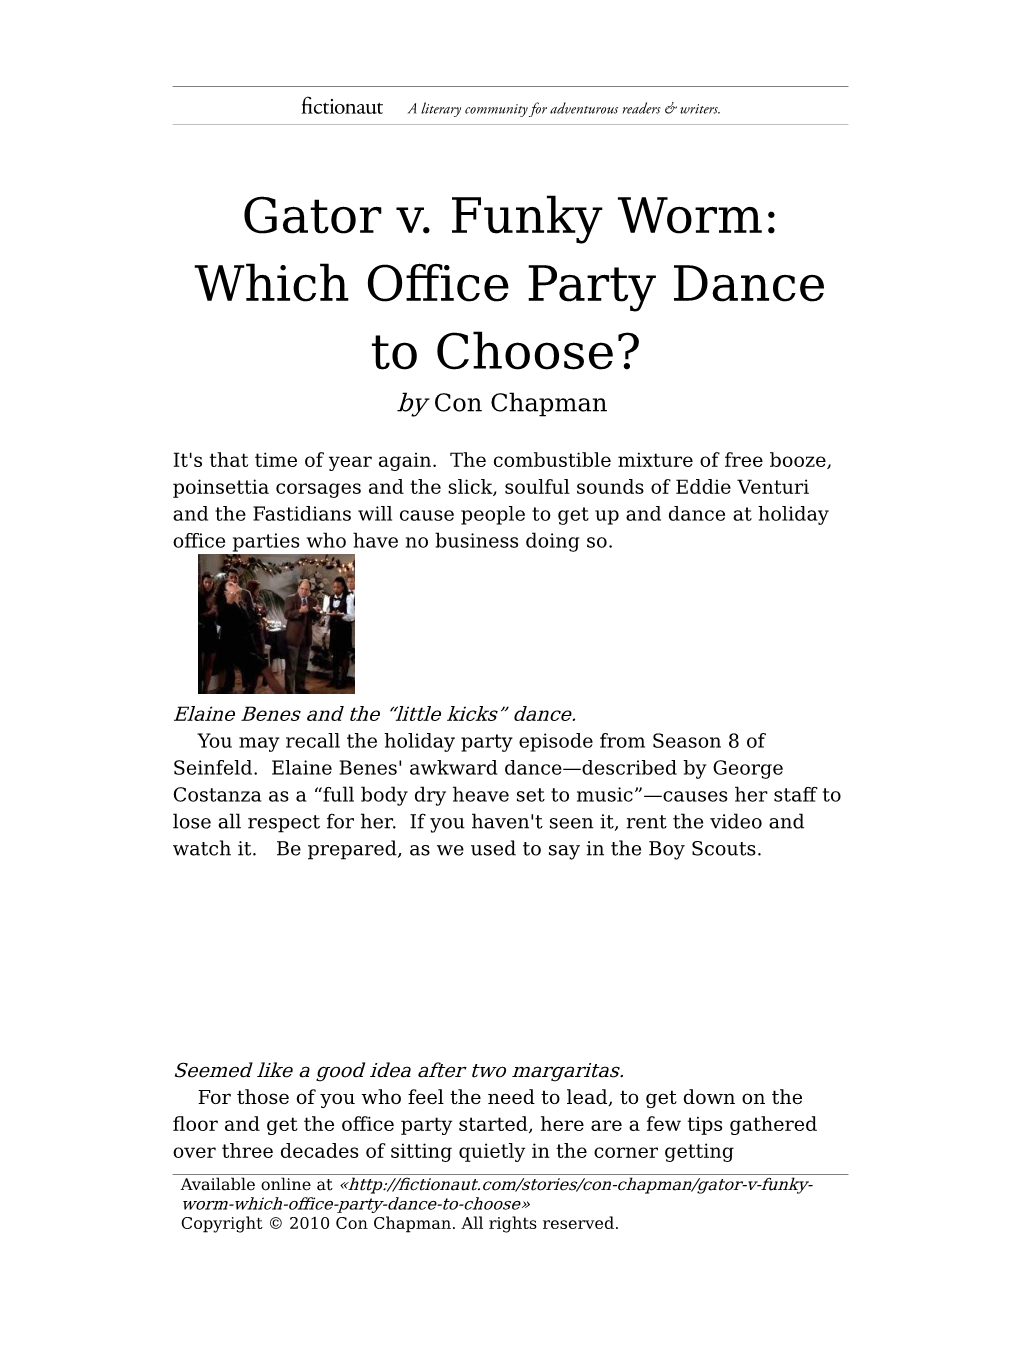 Gator V. Funky Worm: Which Office Artyp Dance to Choose? by Con Chapman